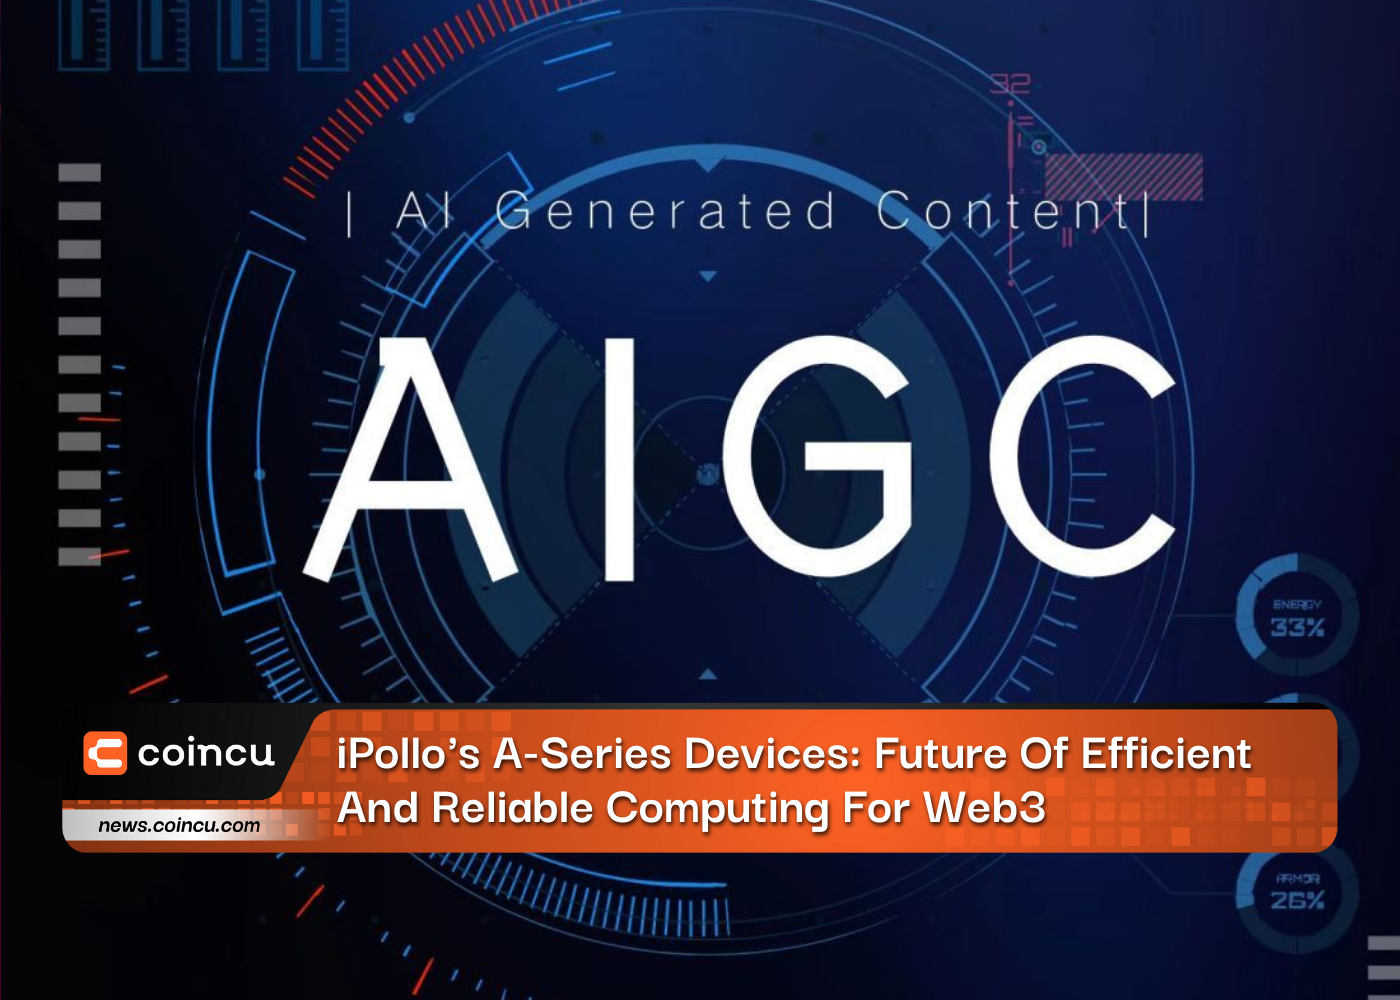 iPollo's A-Series Devices: Future Of Efficient And Reliable Computing For Web3